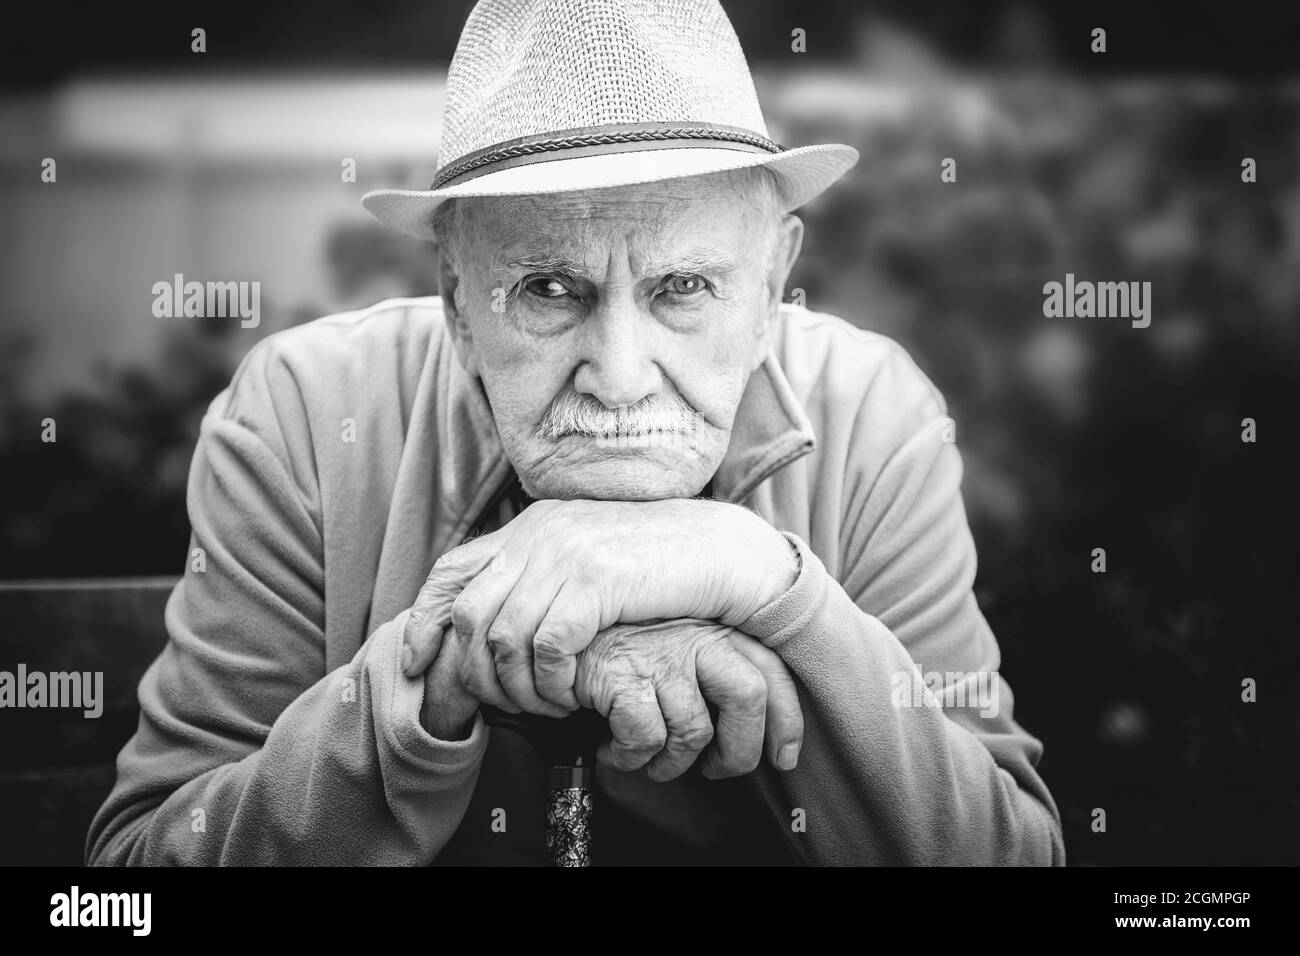 sad, angry old man in a hat is sitting in an open-air garden. the concept of loneliness and lonely old age. Black and white portrait Stock Photo